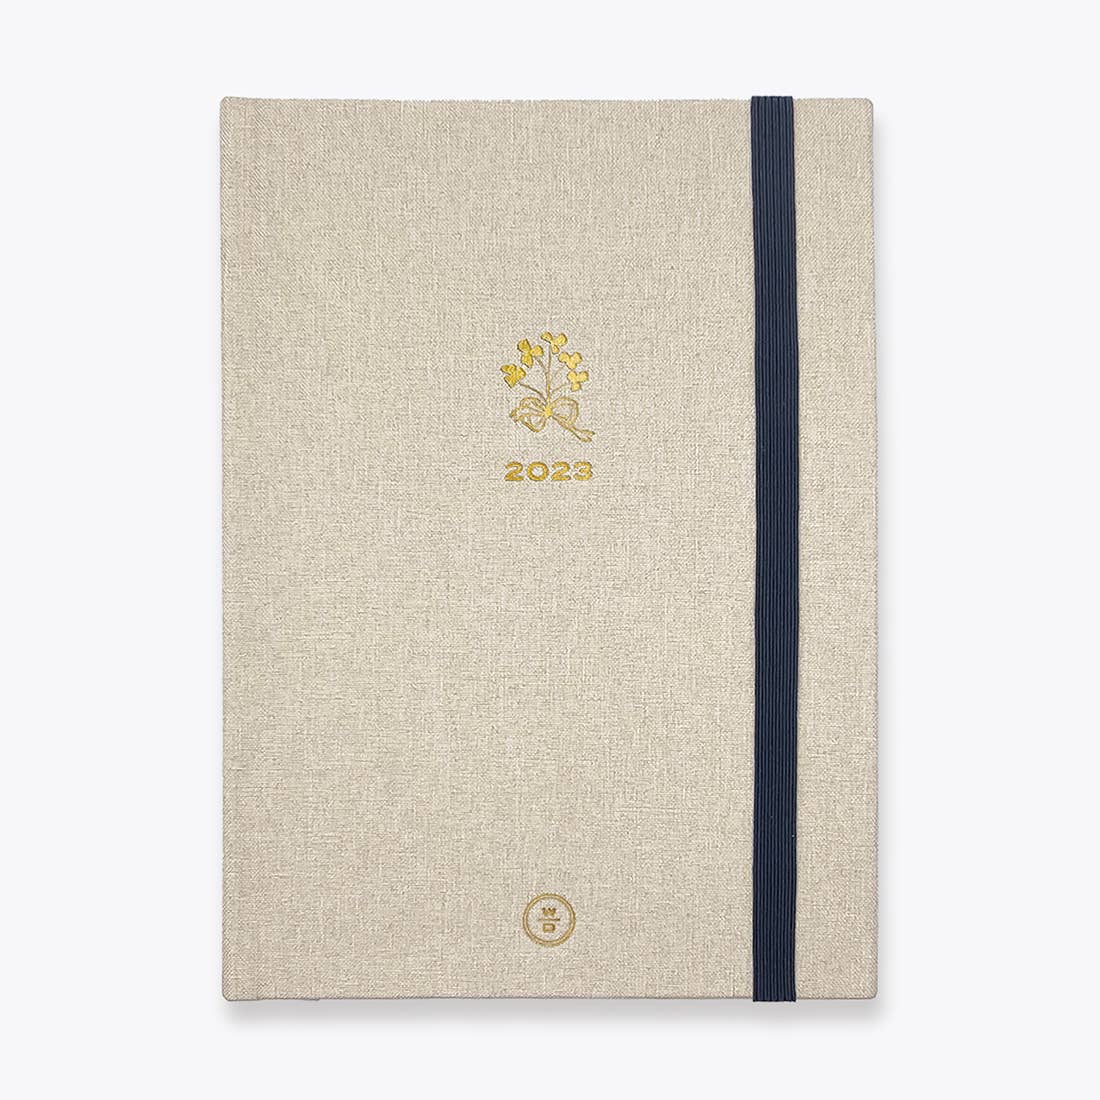 Cream Linen 2023 Planner | REMOVE FROM INVENTORY